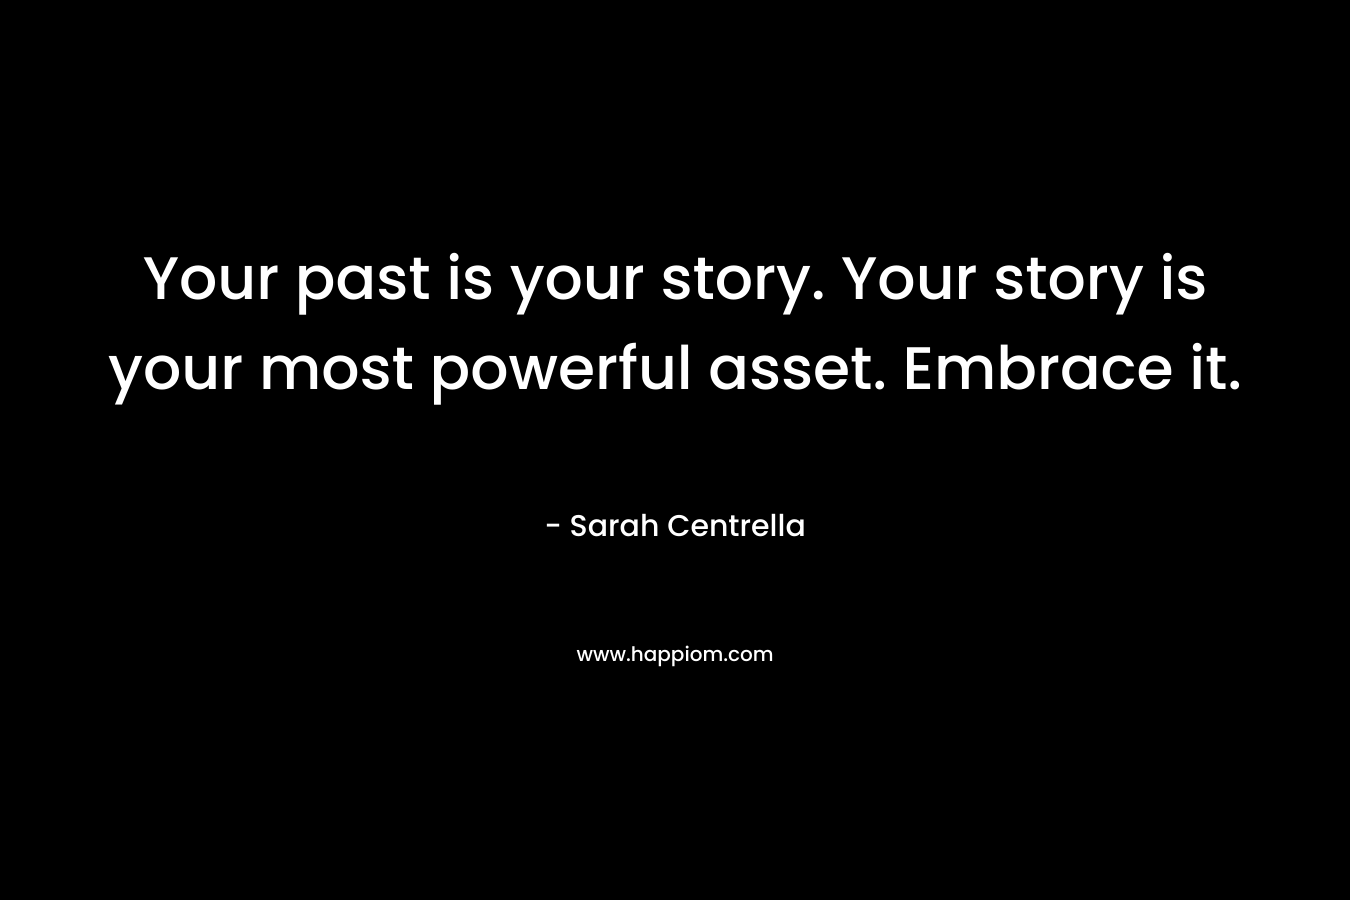 Your past is your story. Your story is your most powerful asset. Embrace it. – Sarah Centrella